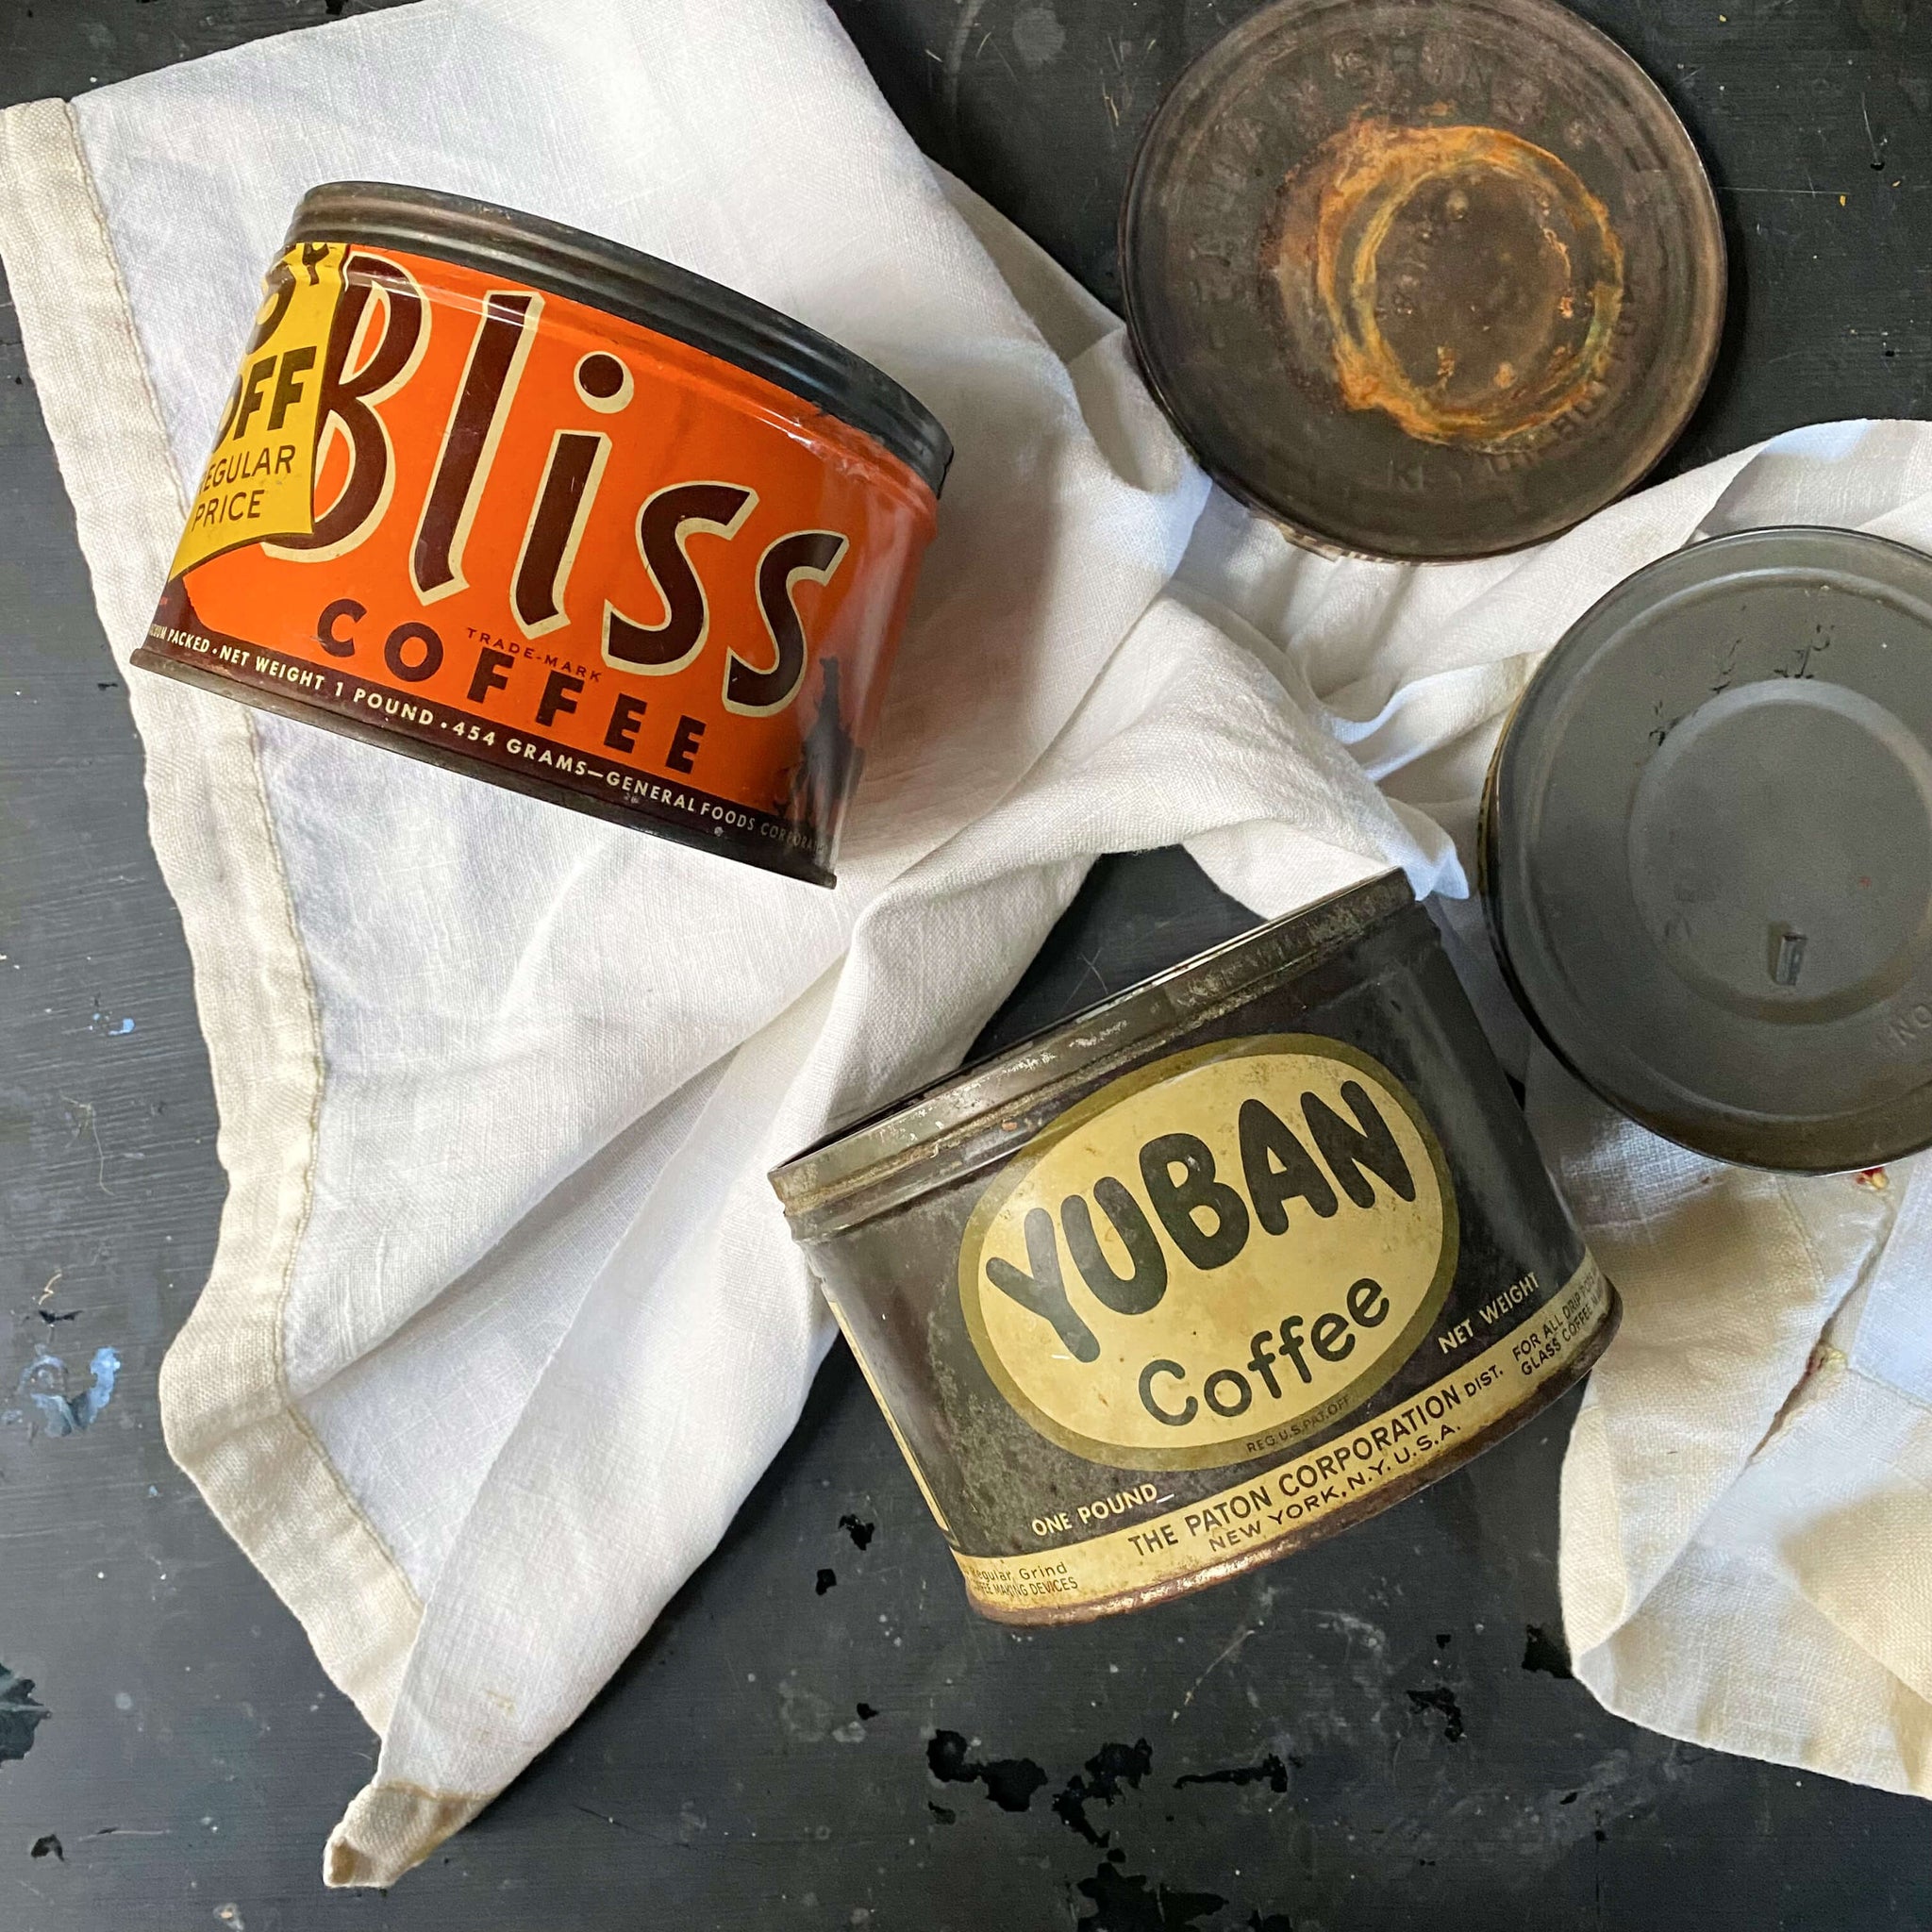 Vintage Yuban & Bliss Coffee Tins circa 1920s-1940s - Sold Separately